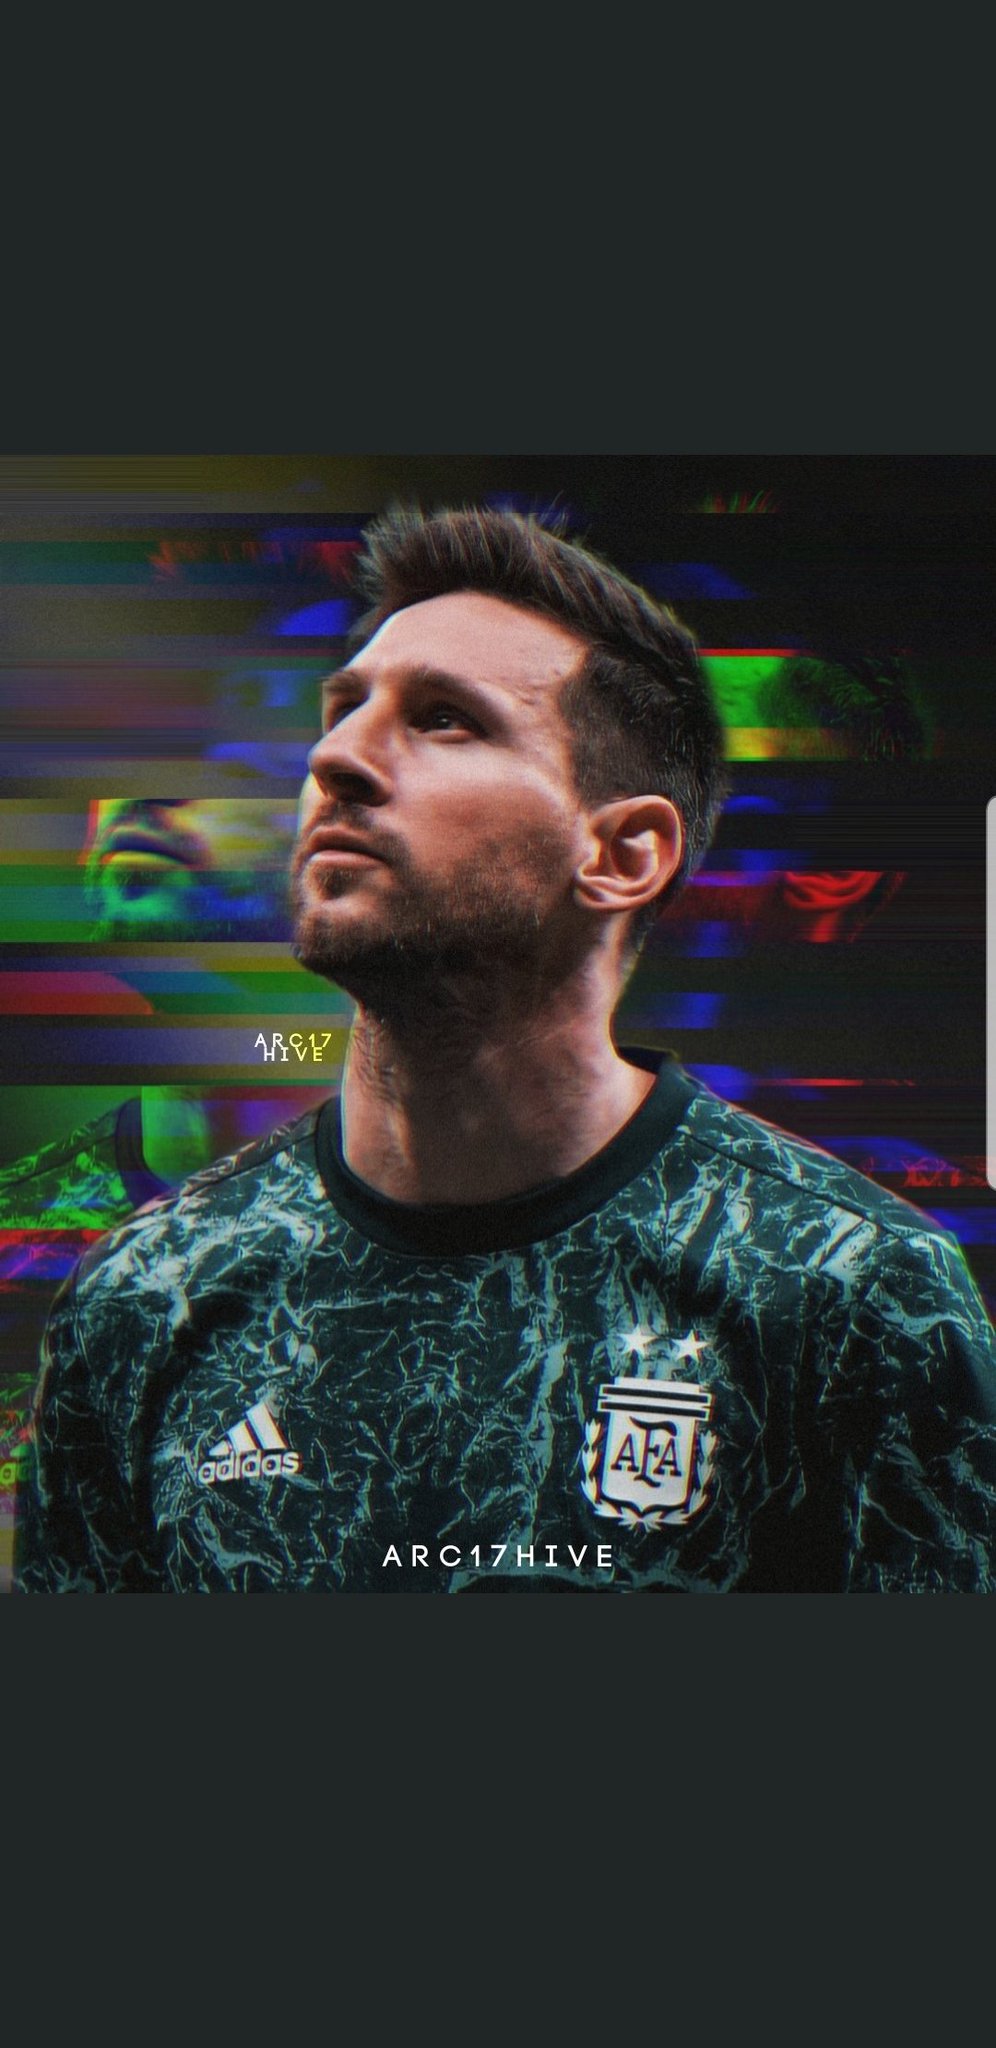 Happy birthday to the greatest of all time Lionel Messi 